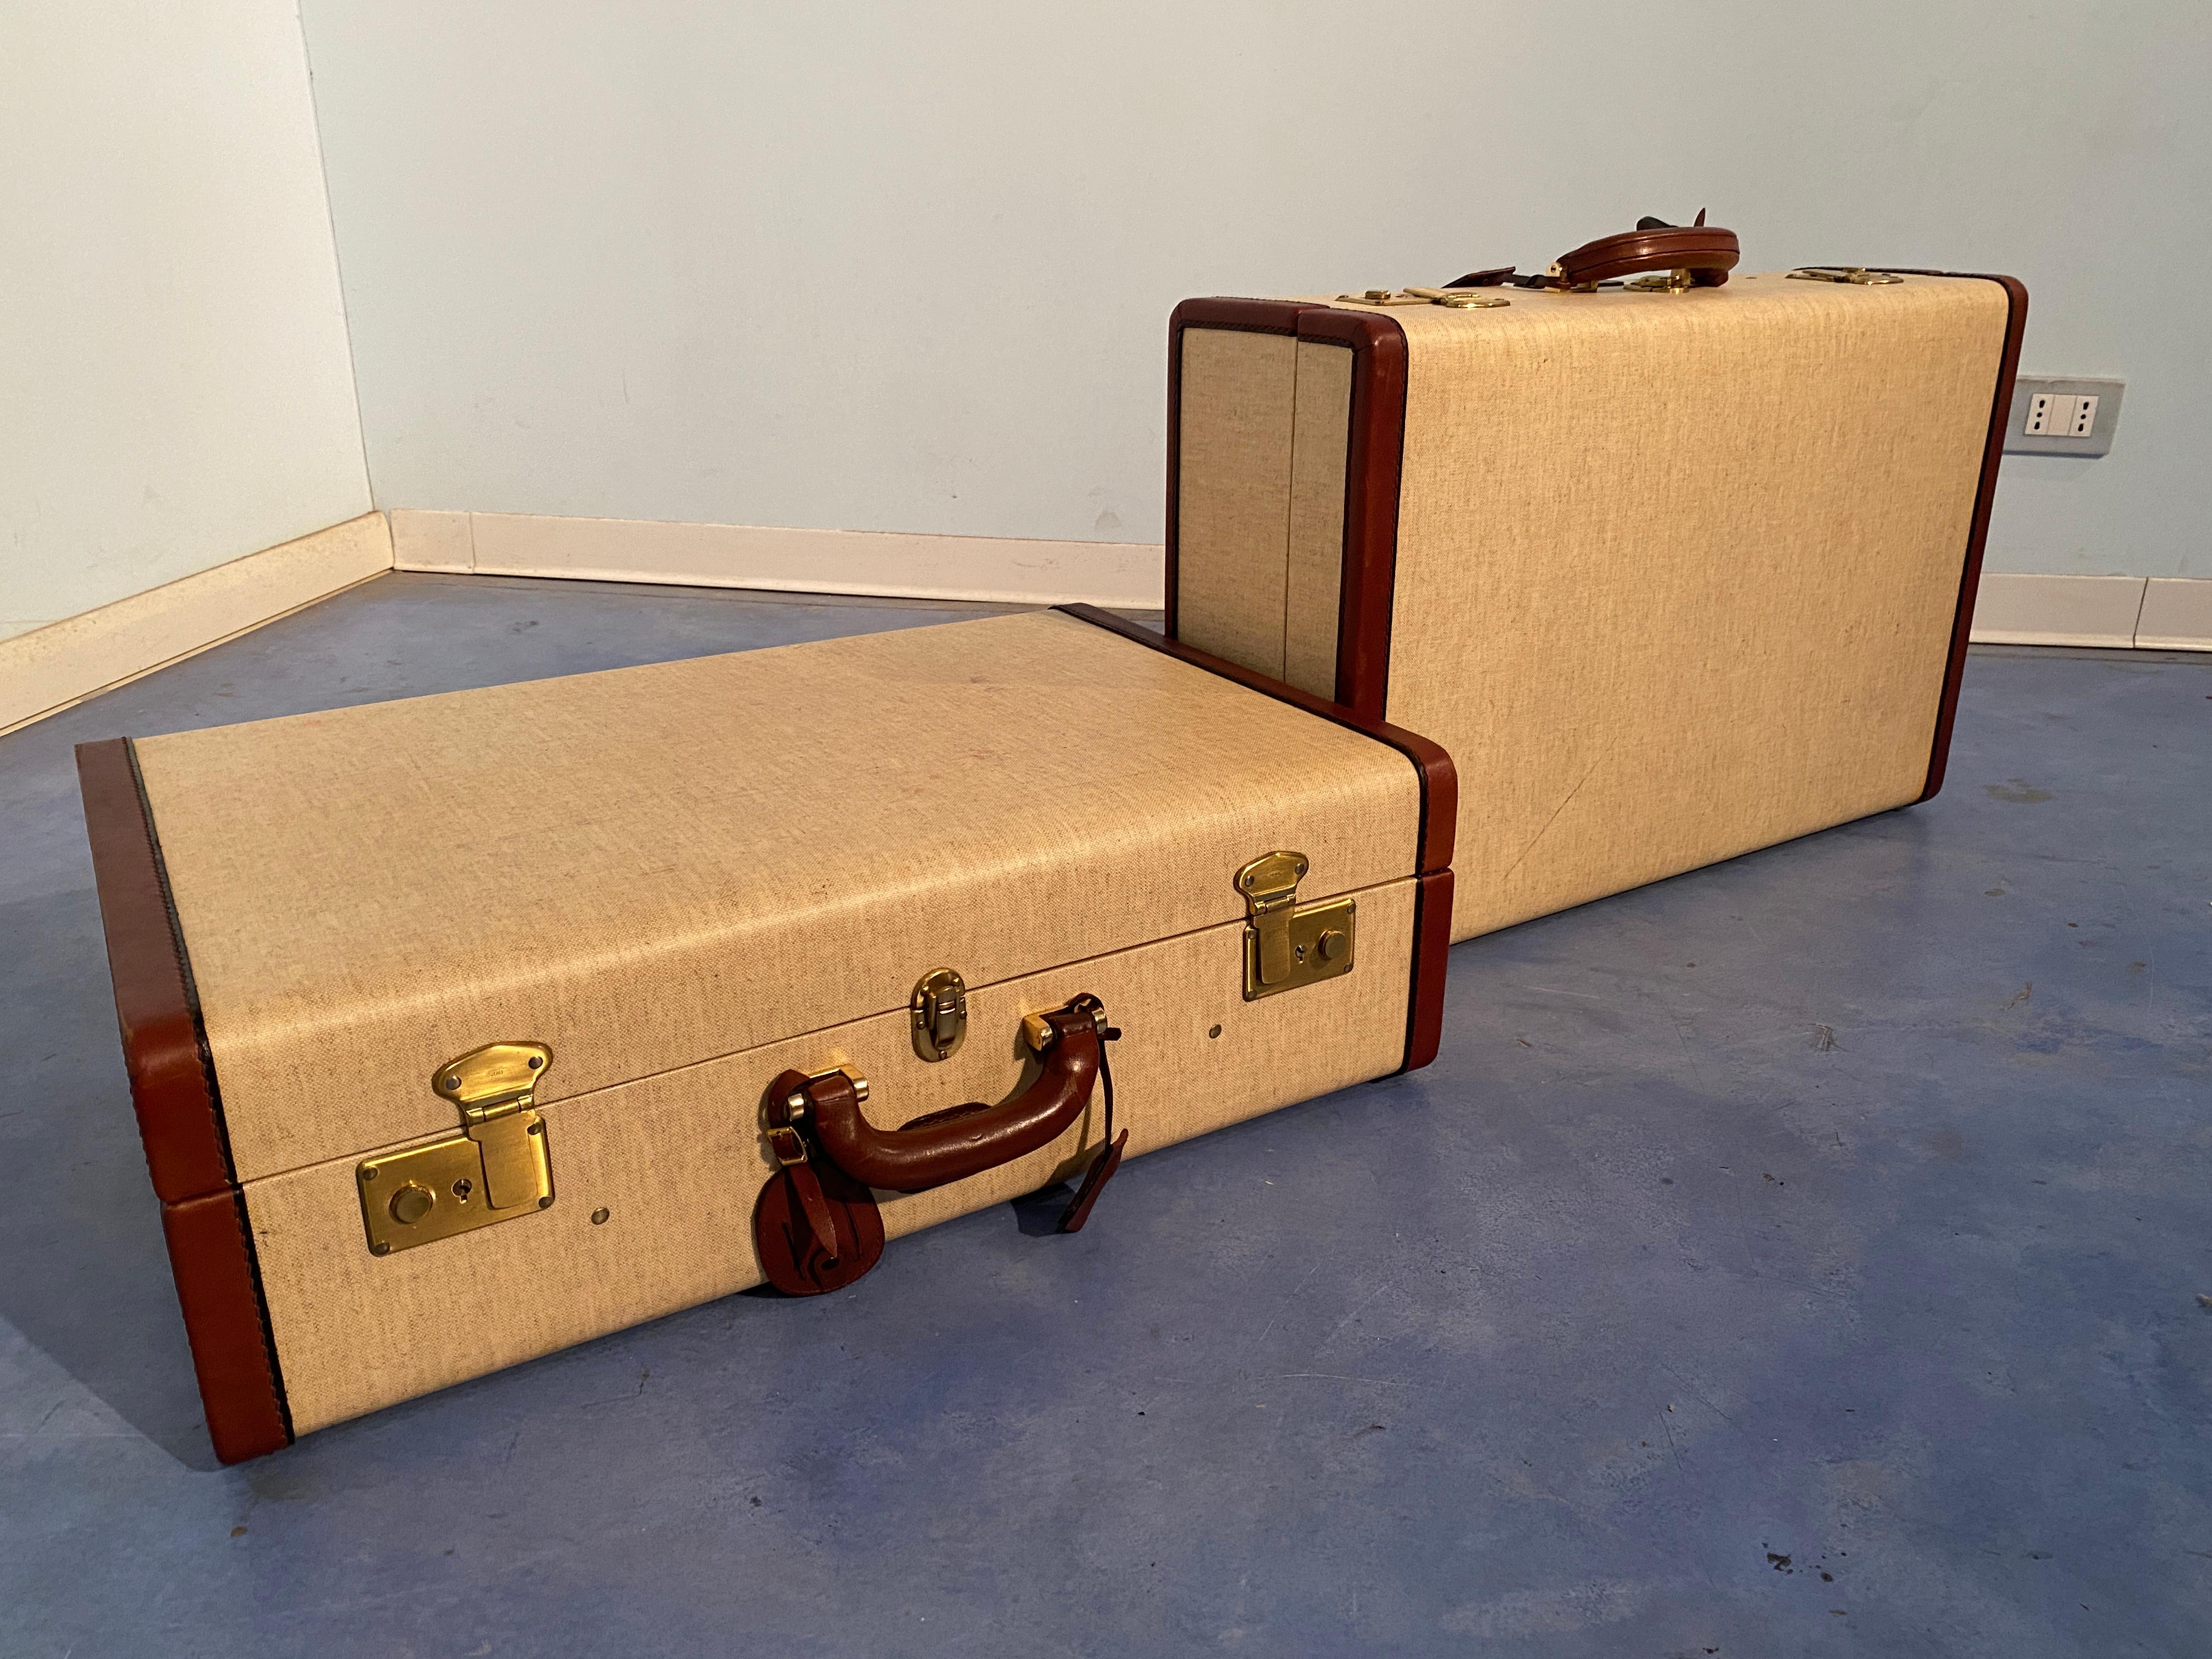 Italian Mid-Century Moder Luggages or Suitcases Mèlange Color, Set of Two, 1960 For Sale 2